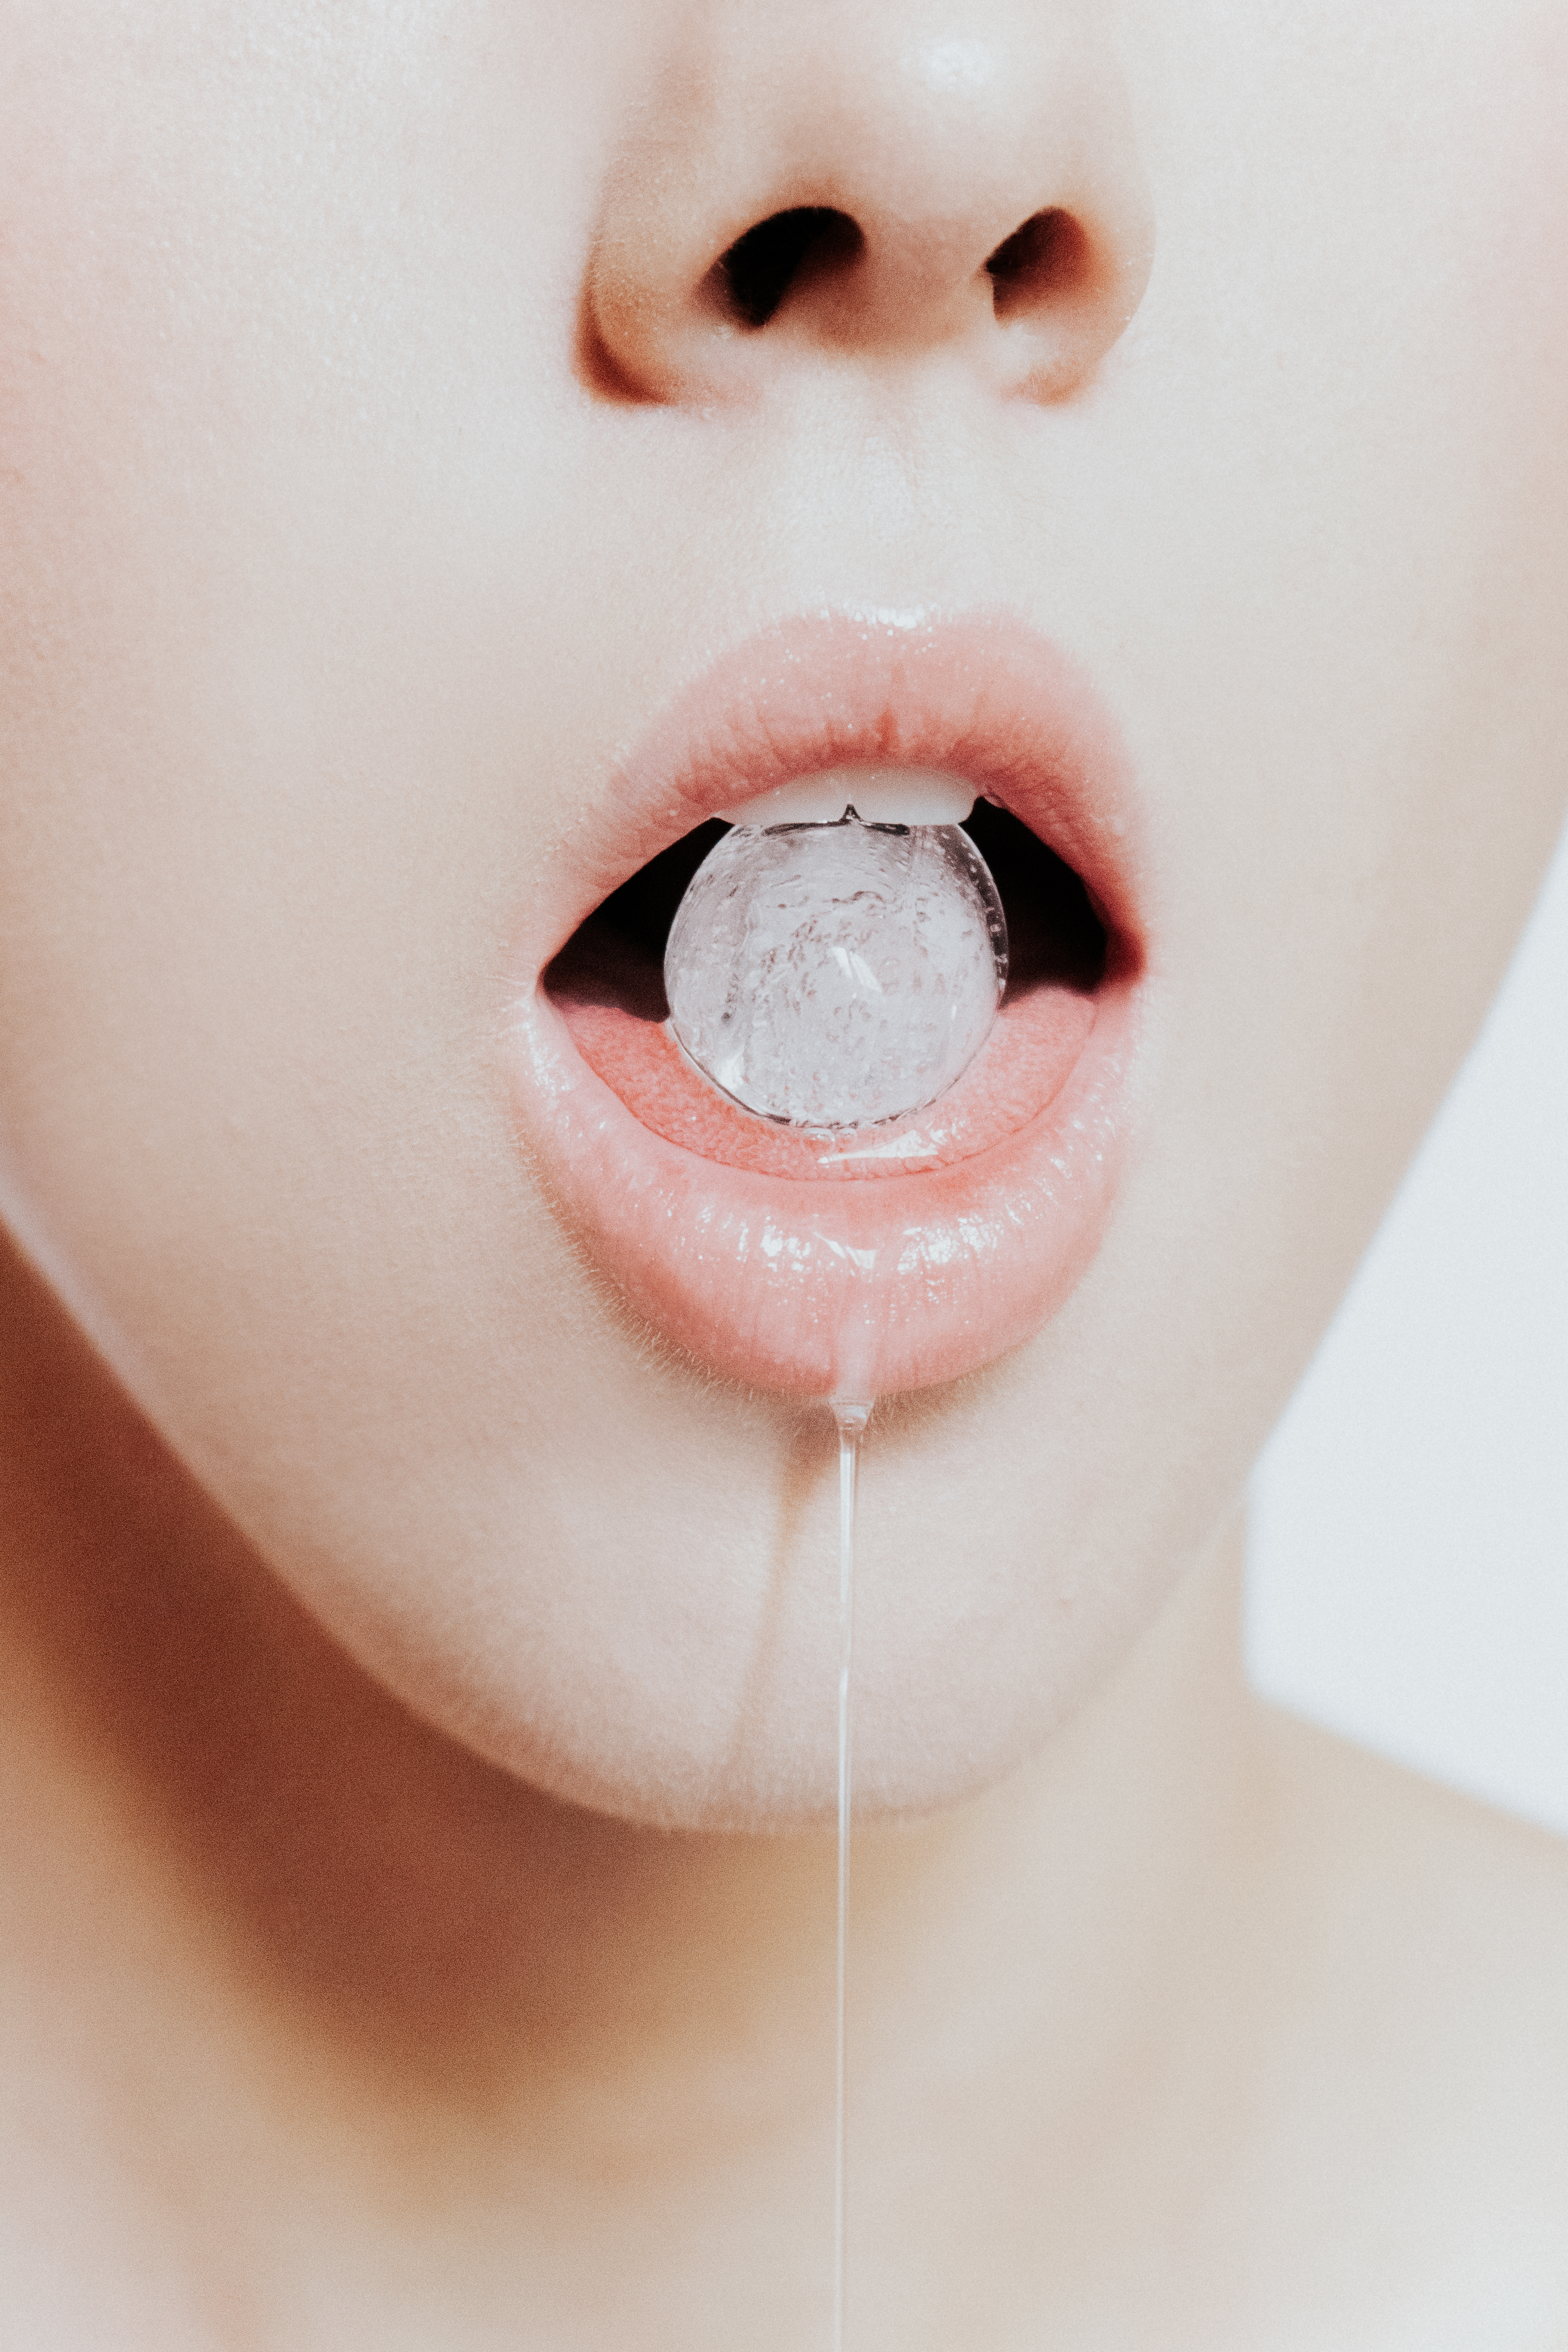 Spit or Swallow? image picture